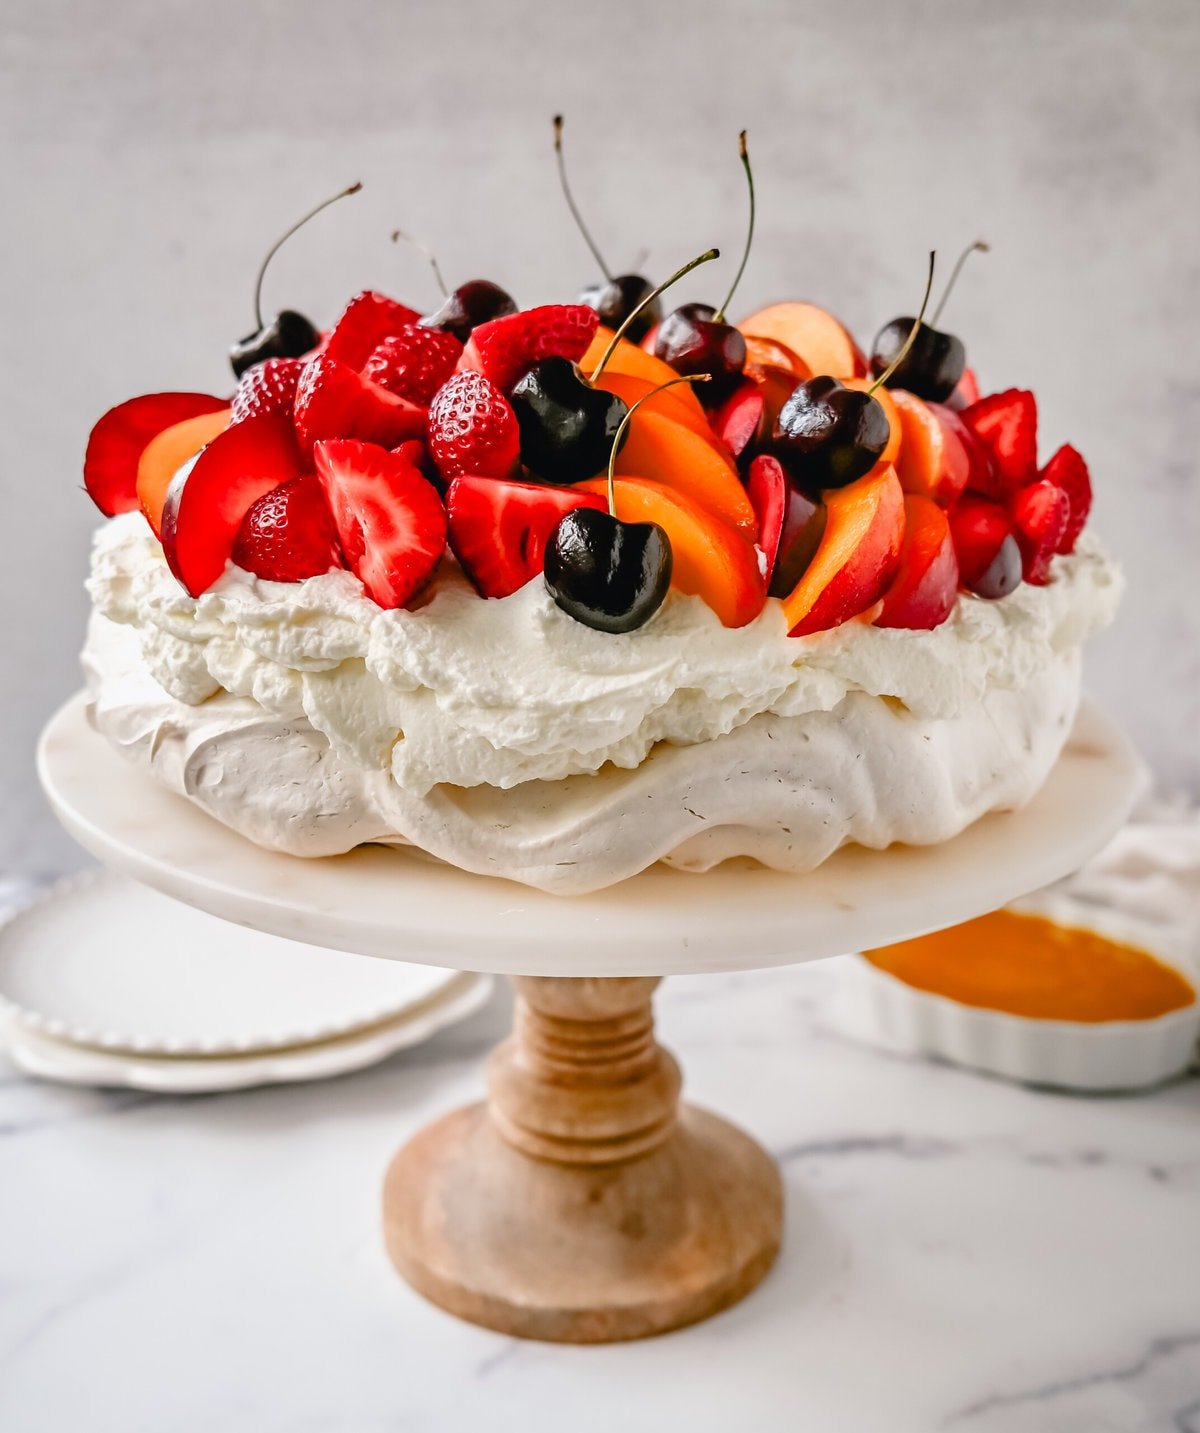 Pavlova. A stunning dessert with a crisp, crunchy outer shell with a soft, marshmallow-like center. Topped with fresh whipped cream and fresh fruit. It is a beautiful and delicious dessert to wow a crowd!